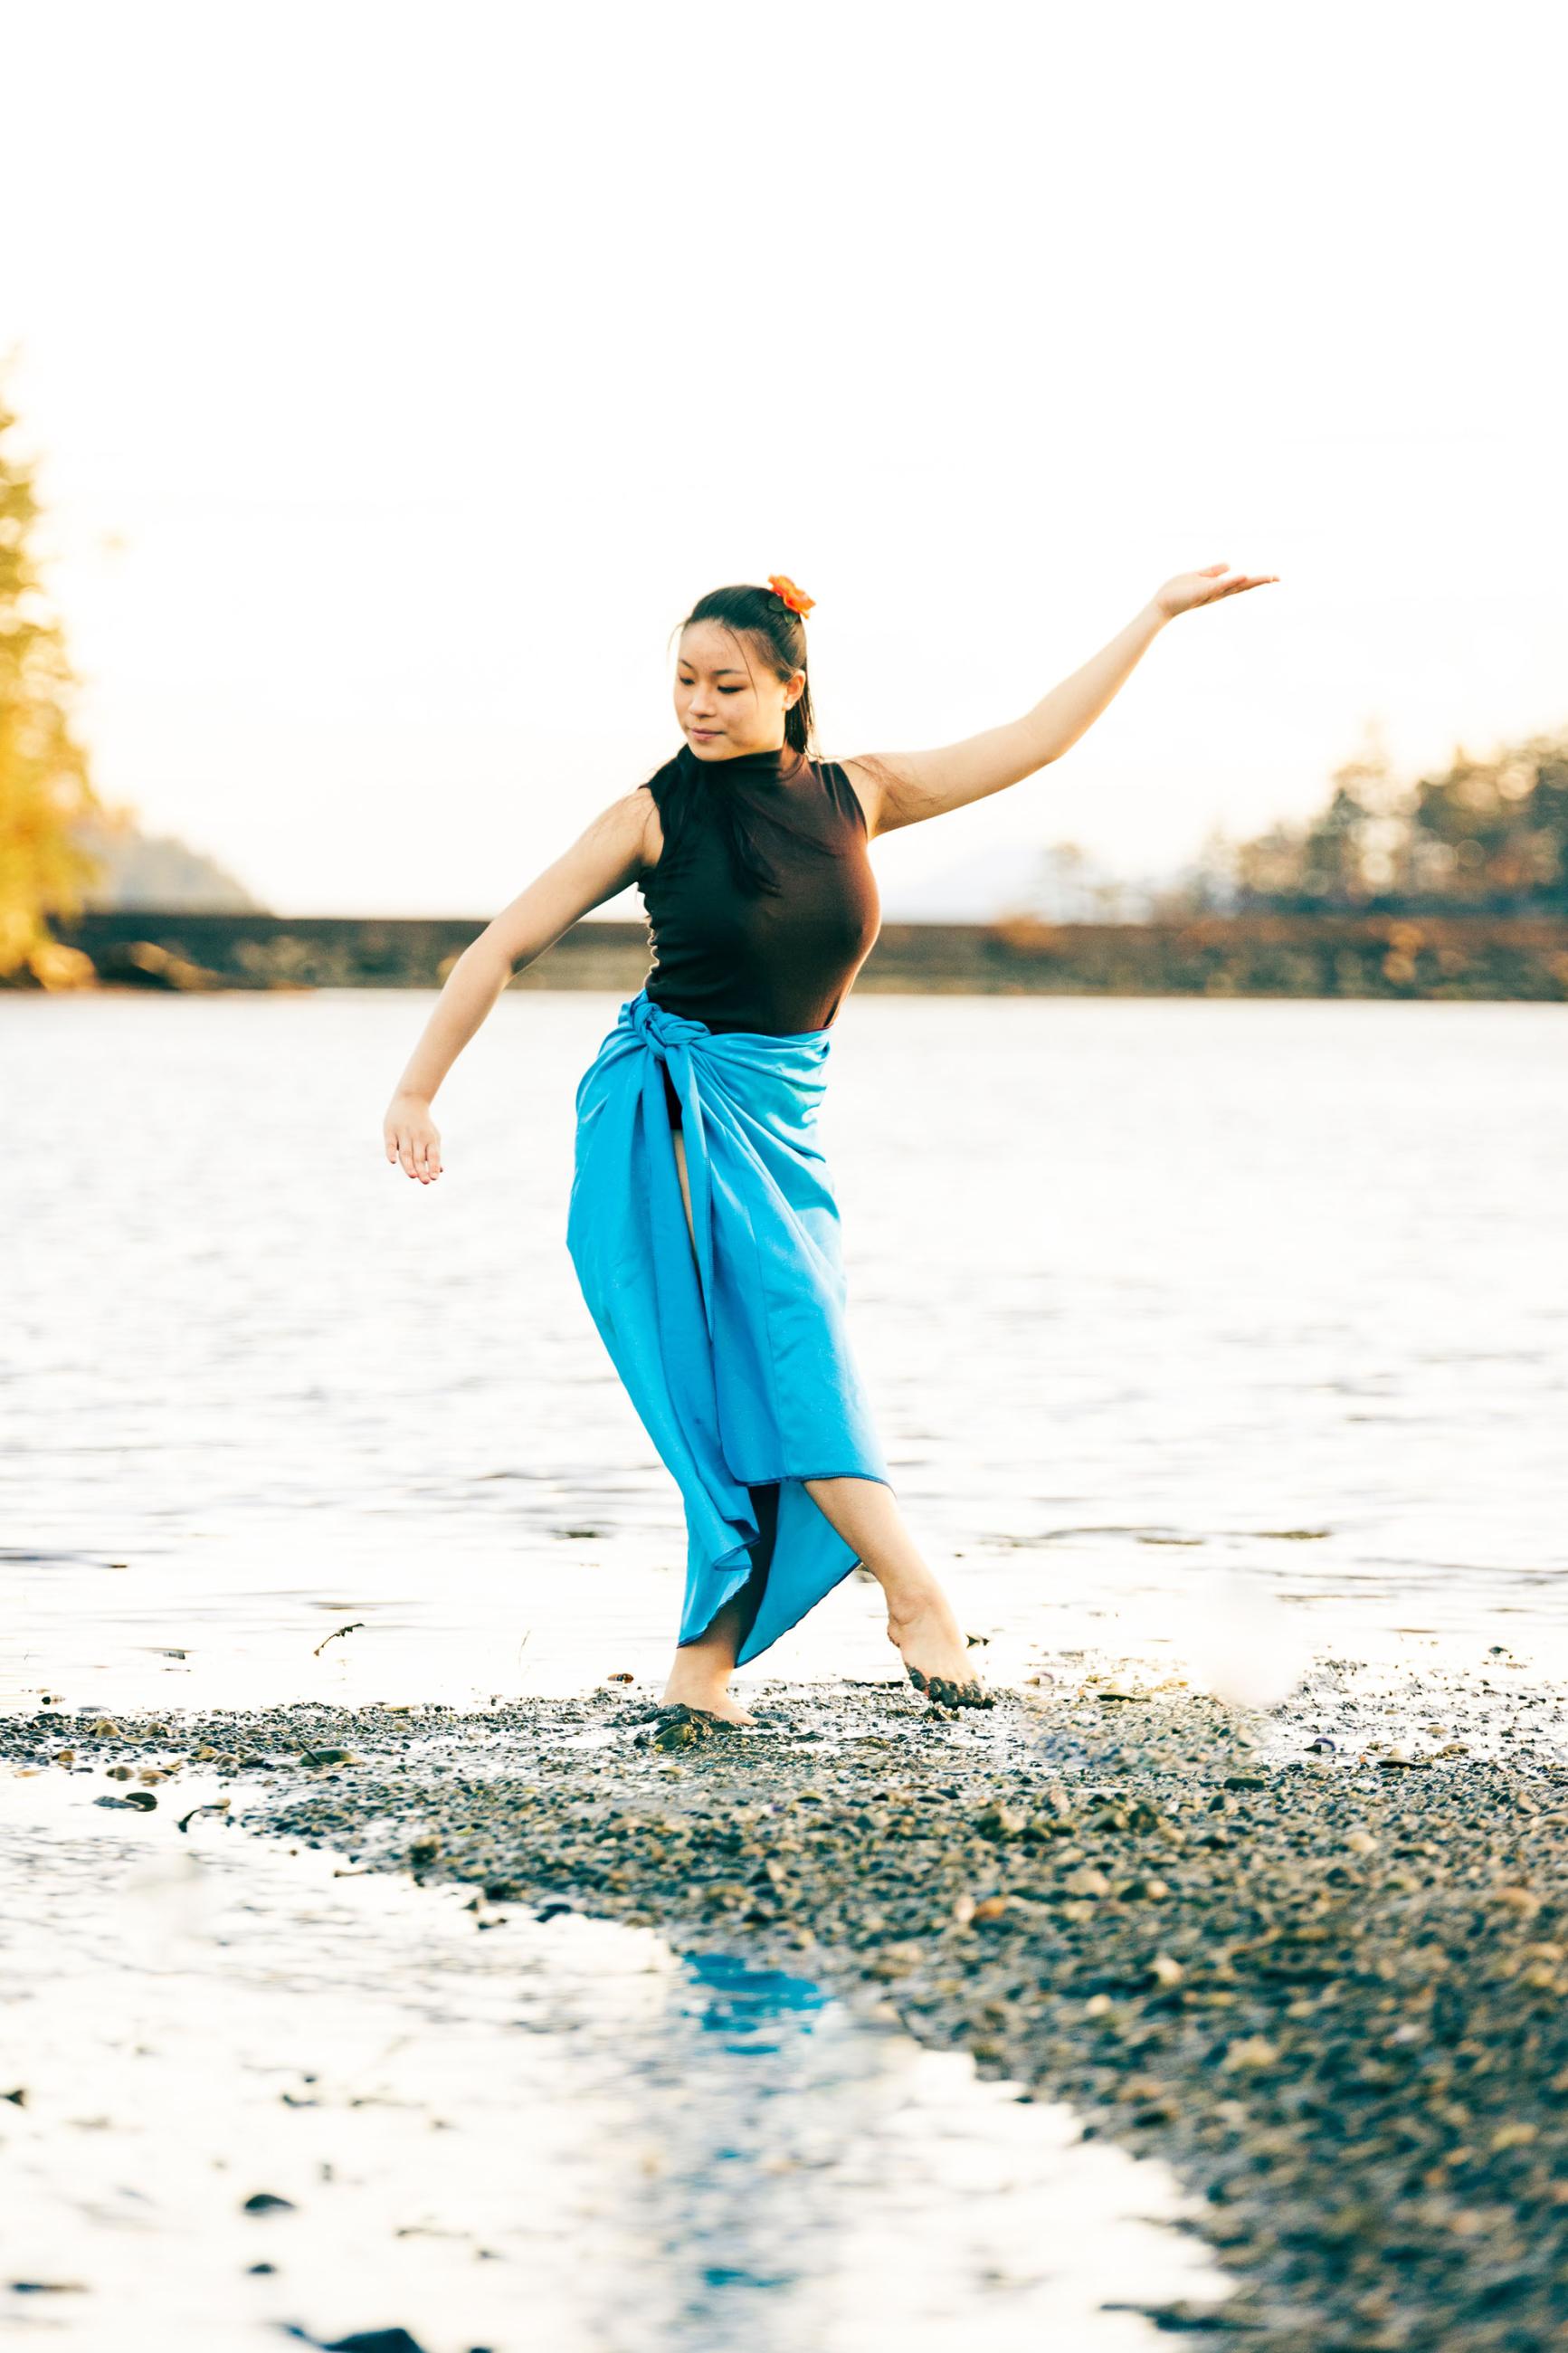 A person wearing a wrap-around skirt in a casual dance position with peaceful expression on a river sandbar